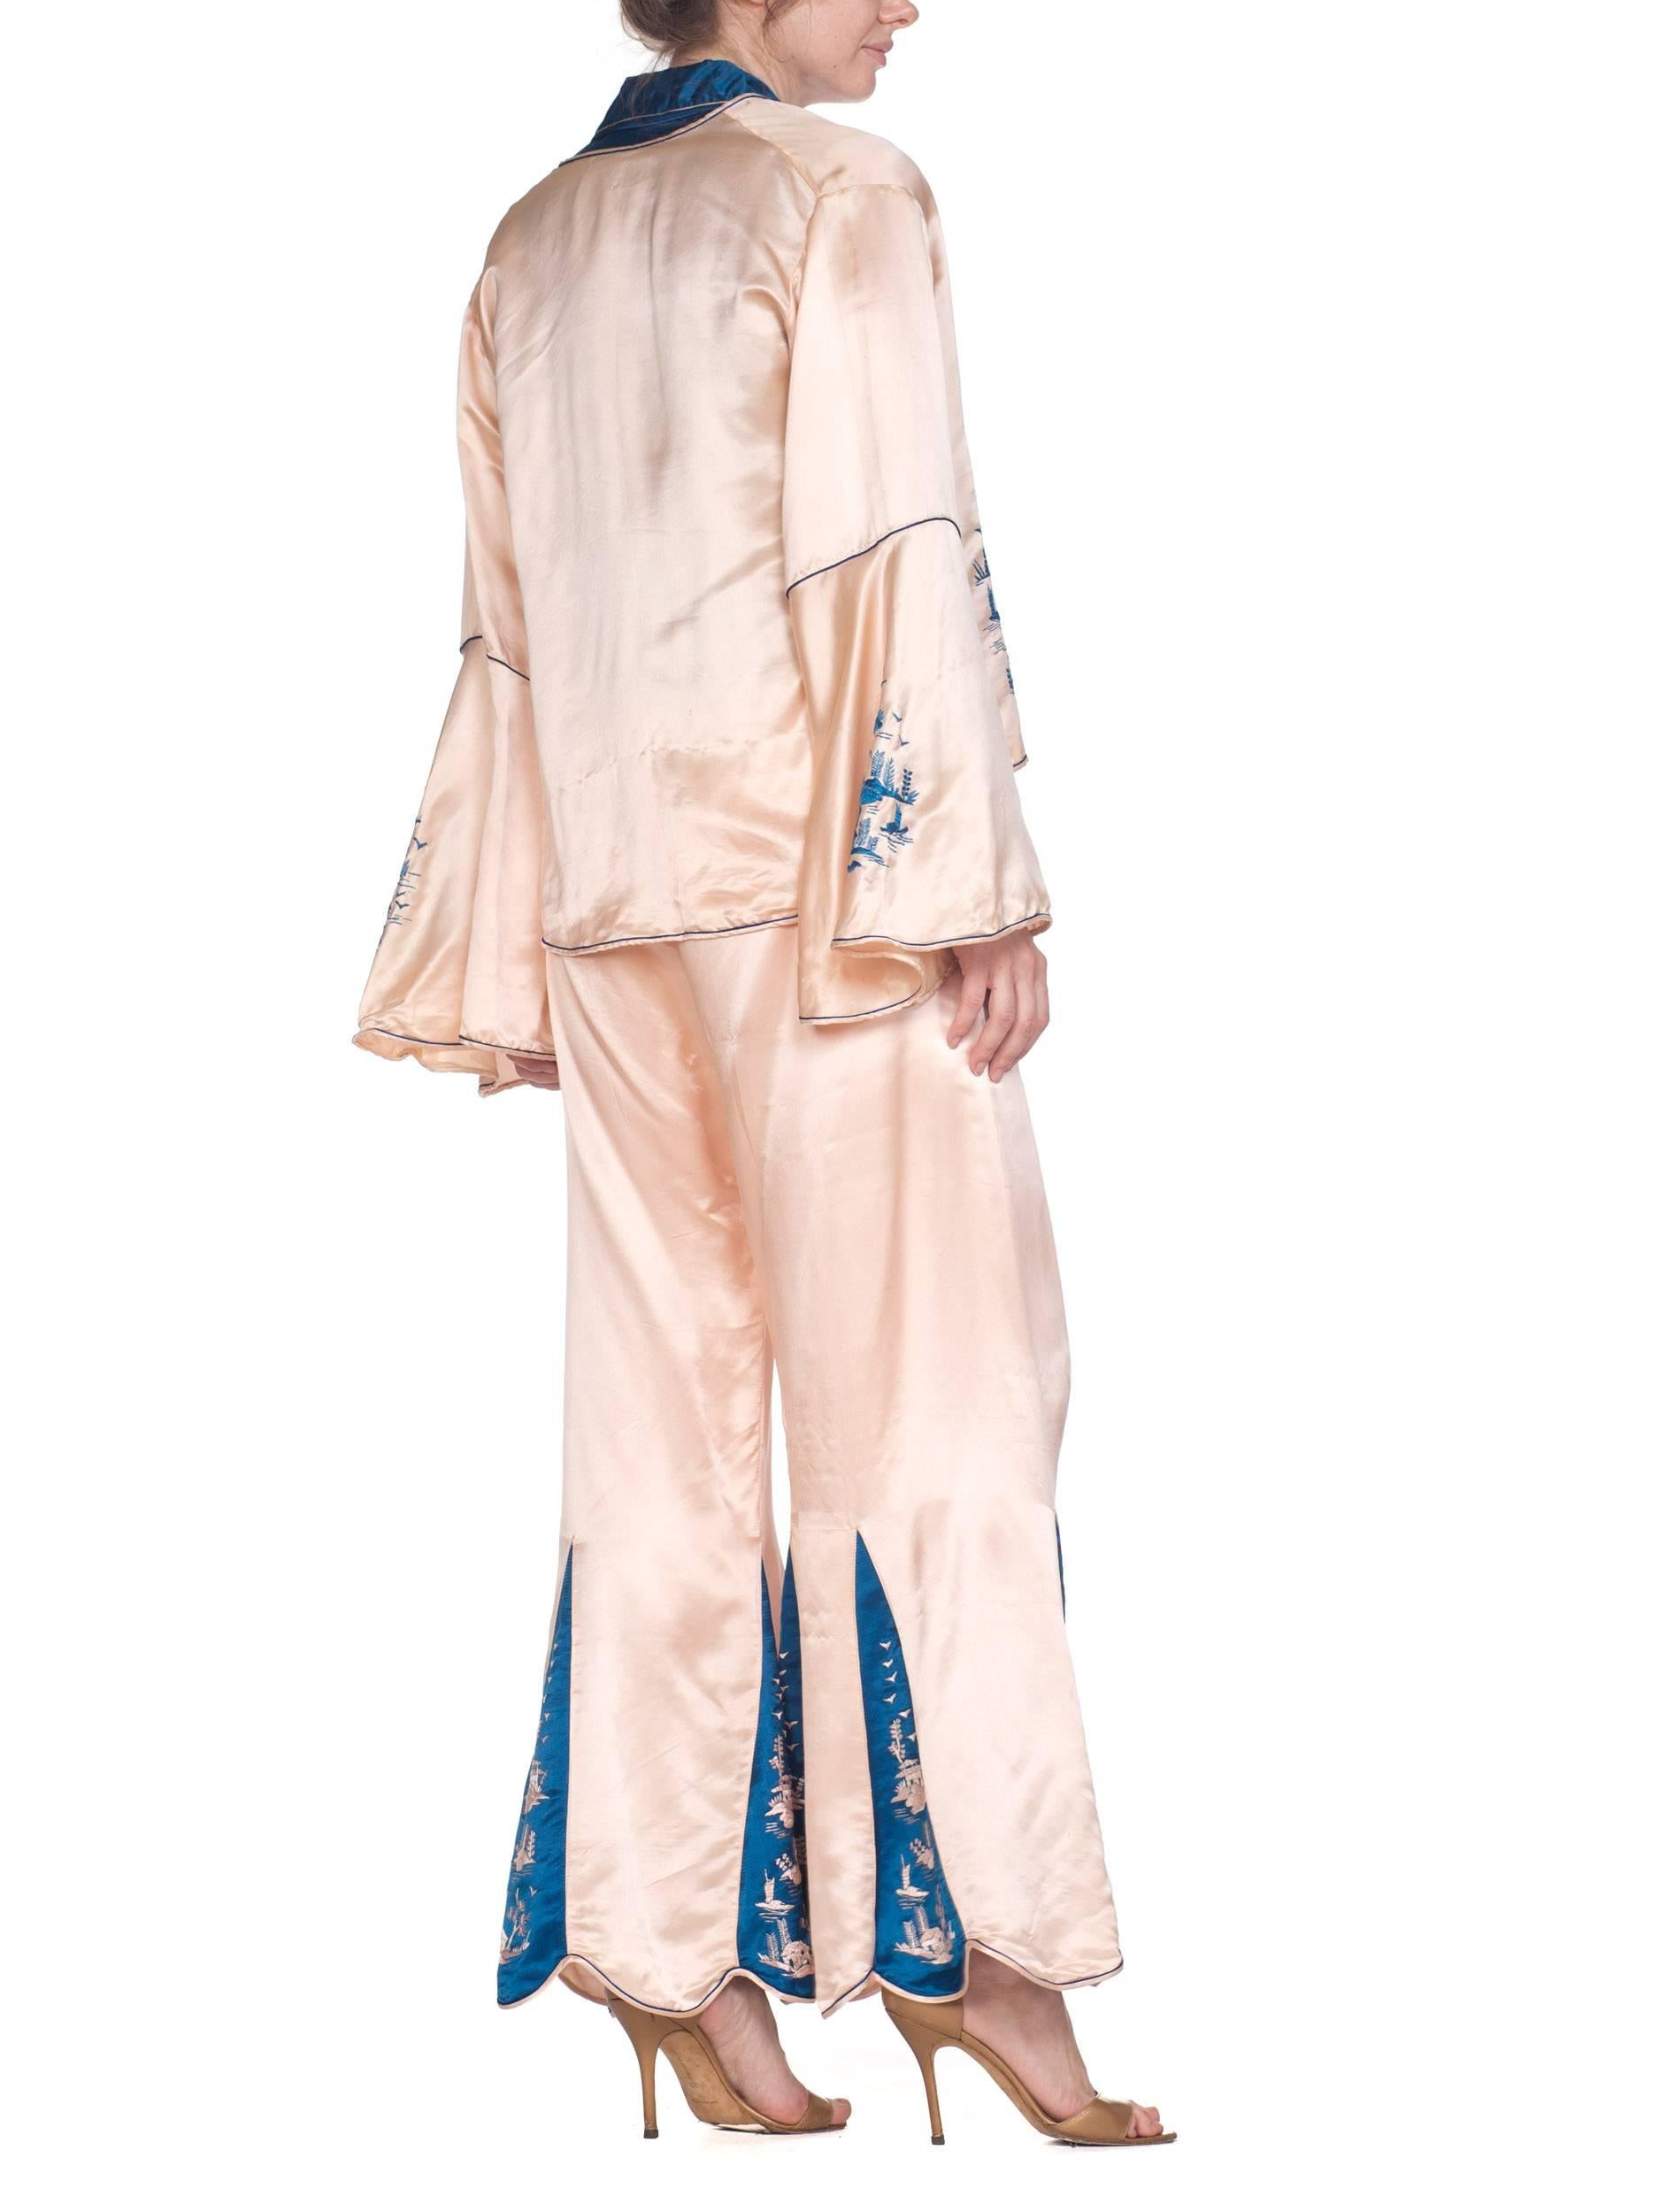 1920s 3 Piece Blue and Cream Chinese Beach Pajamas With Hand Embroidery 2